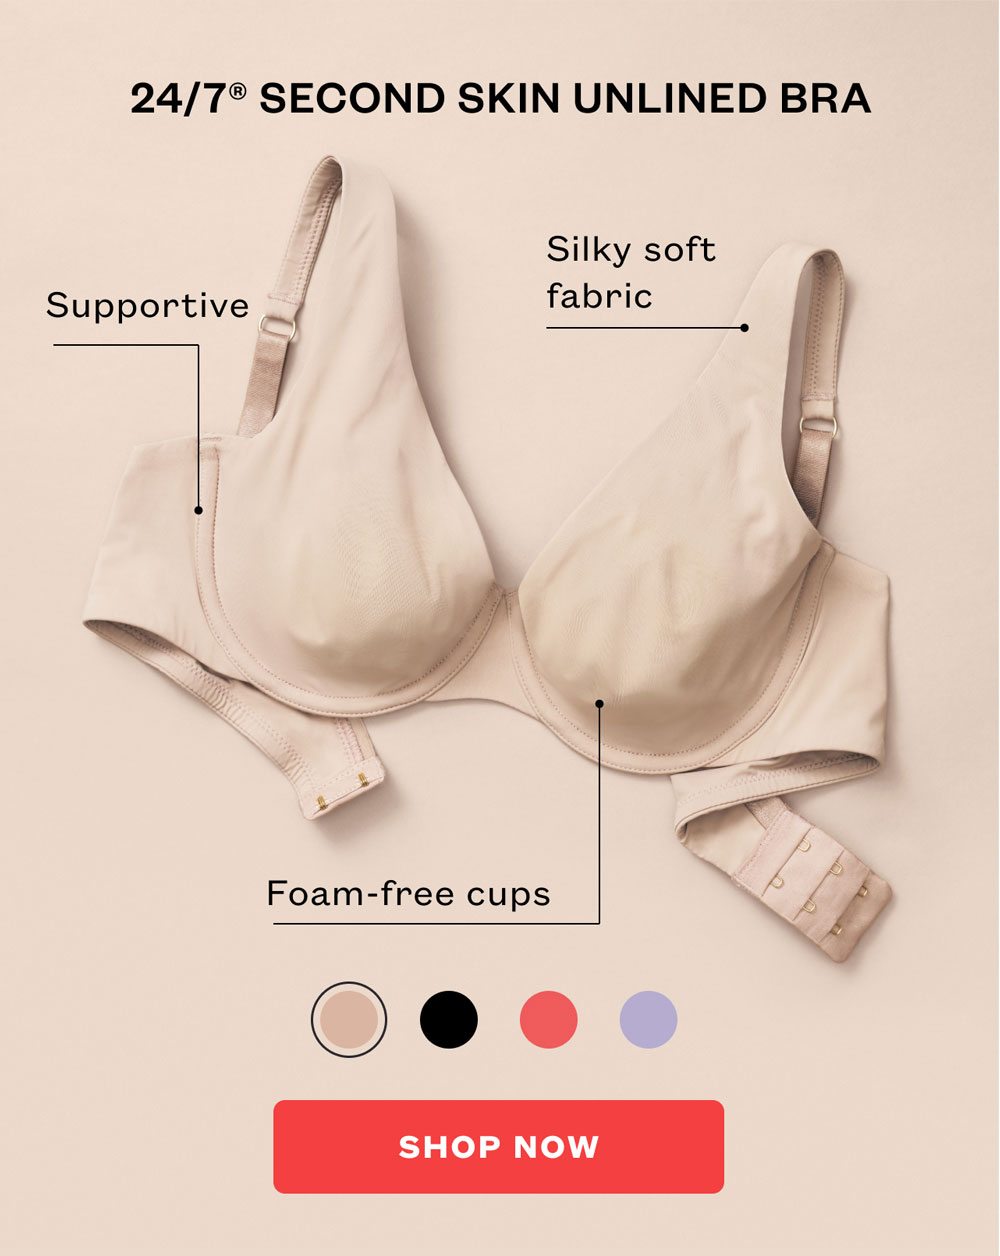 24/7® Second Skin Unlined Bra. Supportive. Silky soft fabric. Foam-free cups. SHOP NOW.